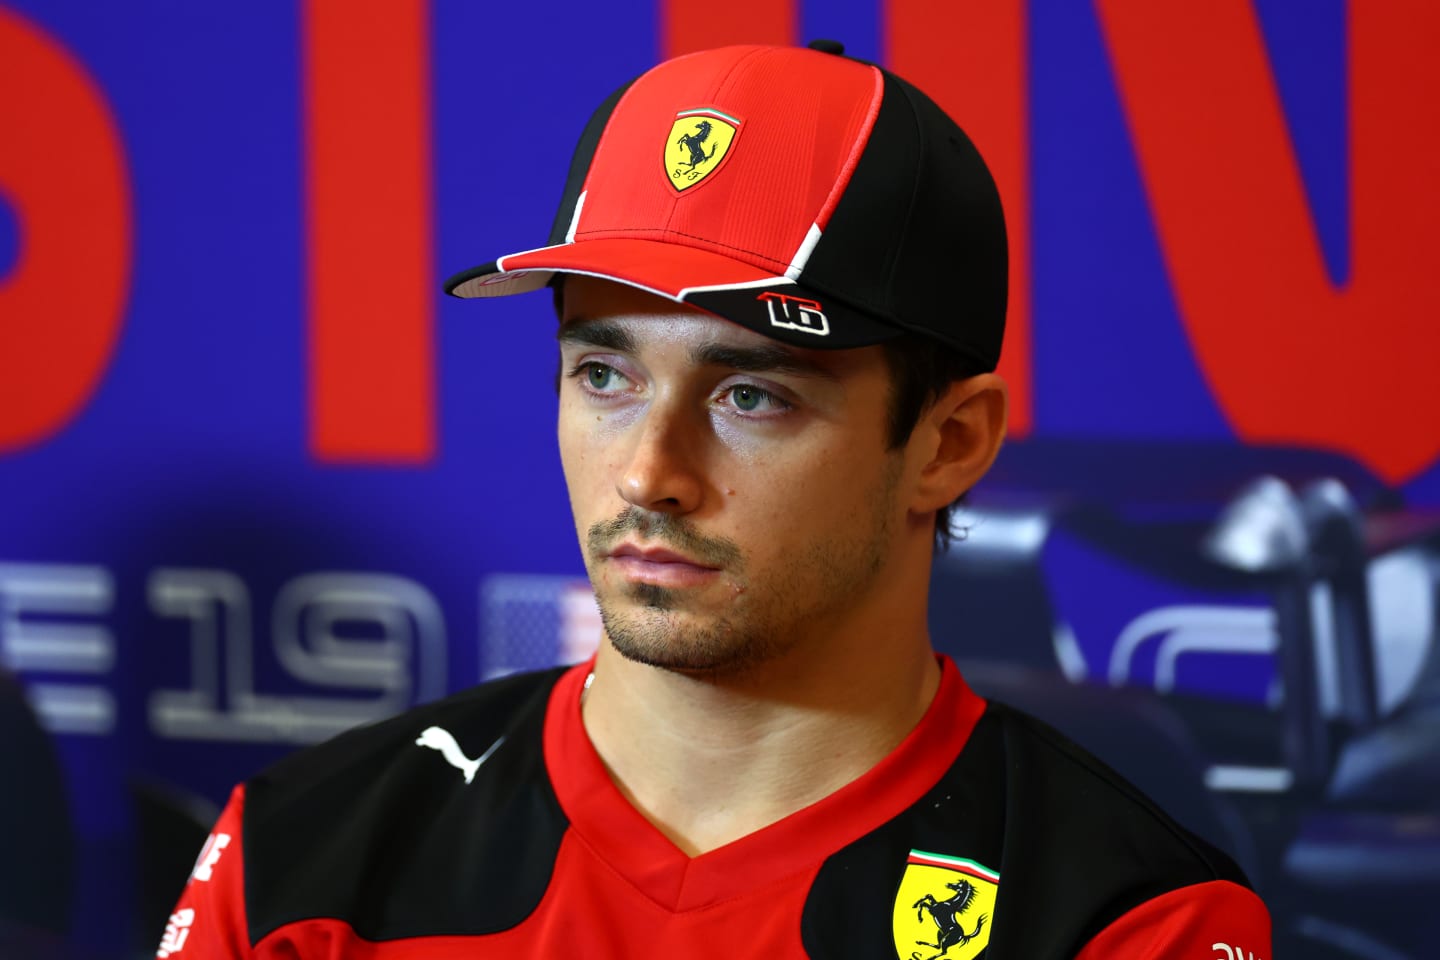 AUSTIN, TEXAS - OCTOBER 19: Charles Leclerc of Monaco and Ferrari attends the Drivers Press Conference during previews ahead of the F1 Grand Prix of United States at Circuit of The Americas on October 19, 2023 in Austin, Texas. (Photo by Dan Istitene/Getty Images)